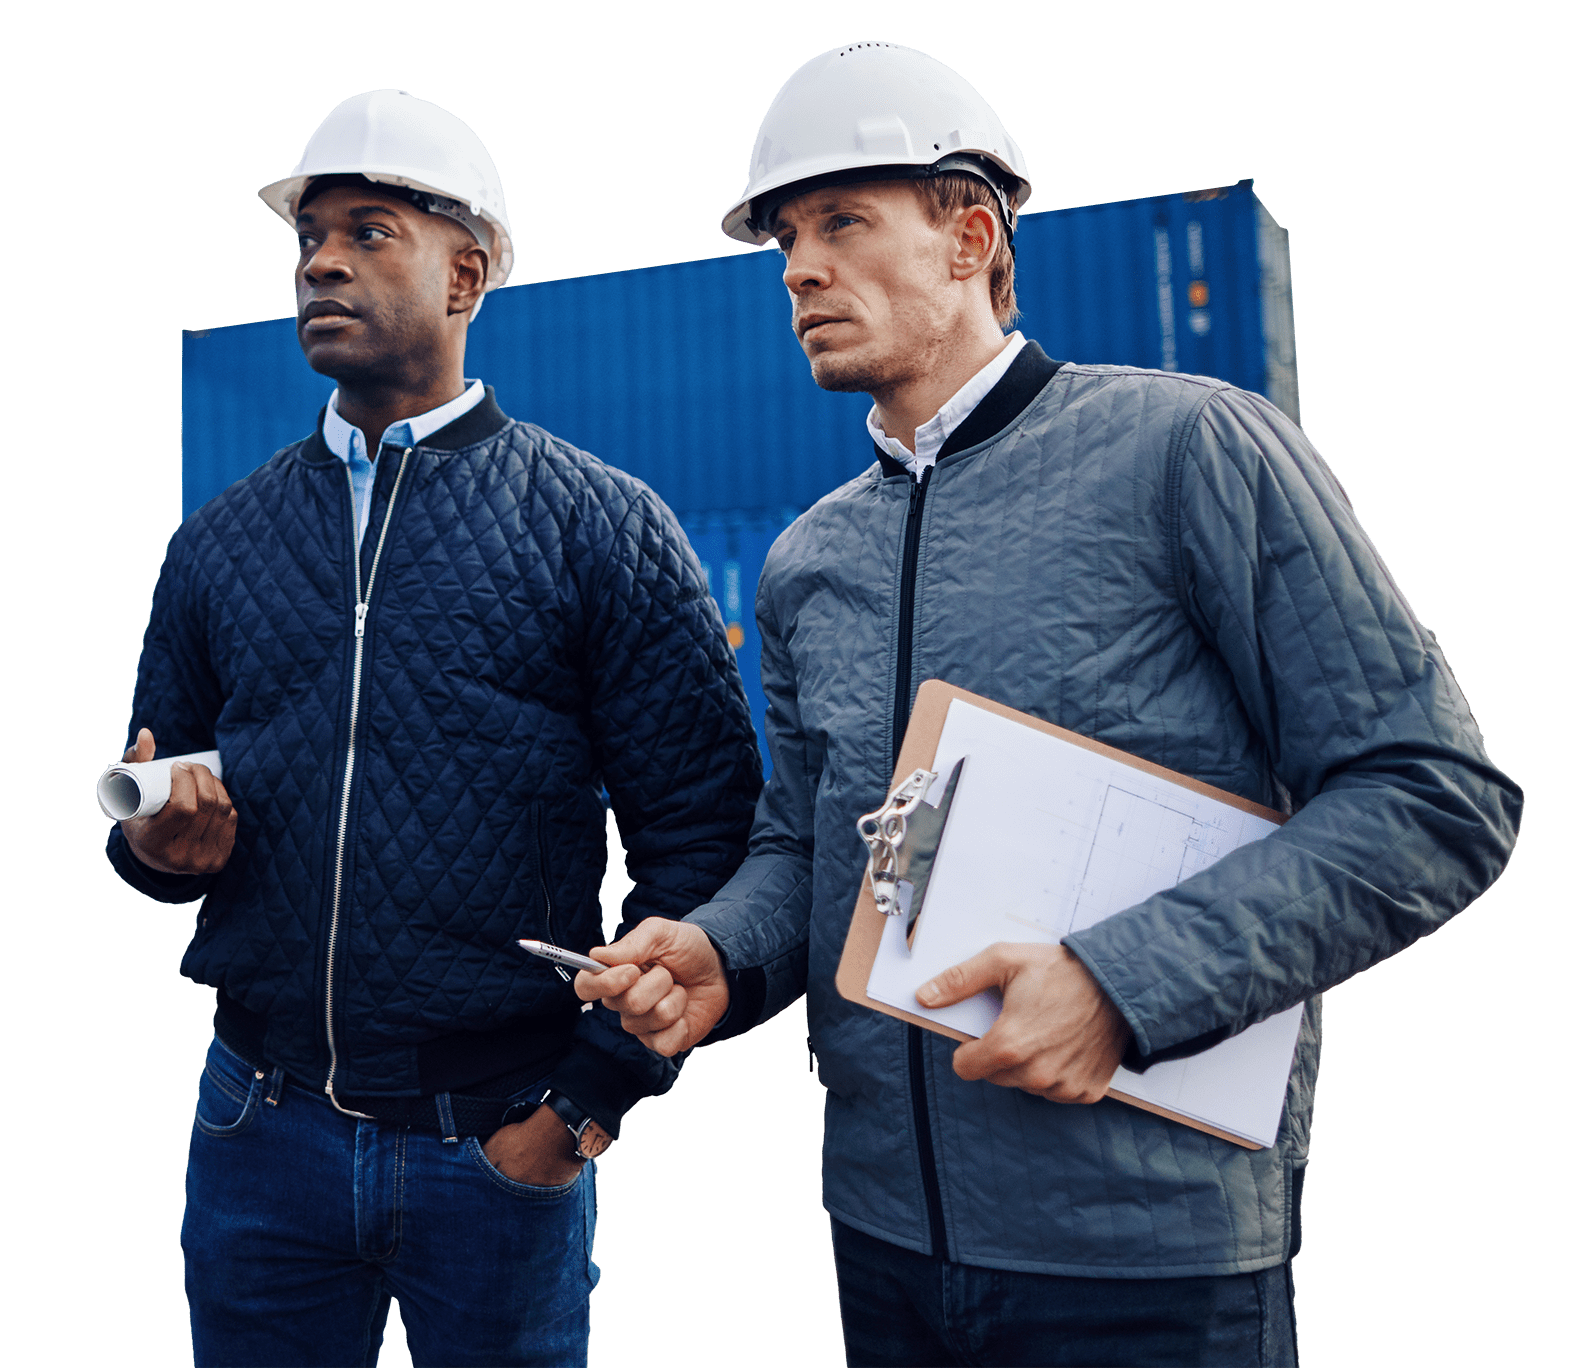 Two men with hard hats and jackets. One has a roll of papers under his arm and the other is holding a clipboard and a pen.